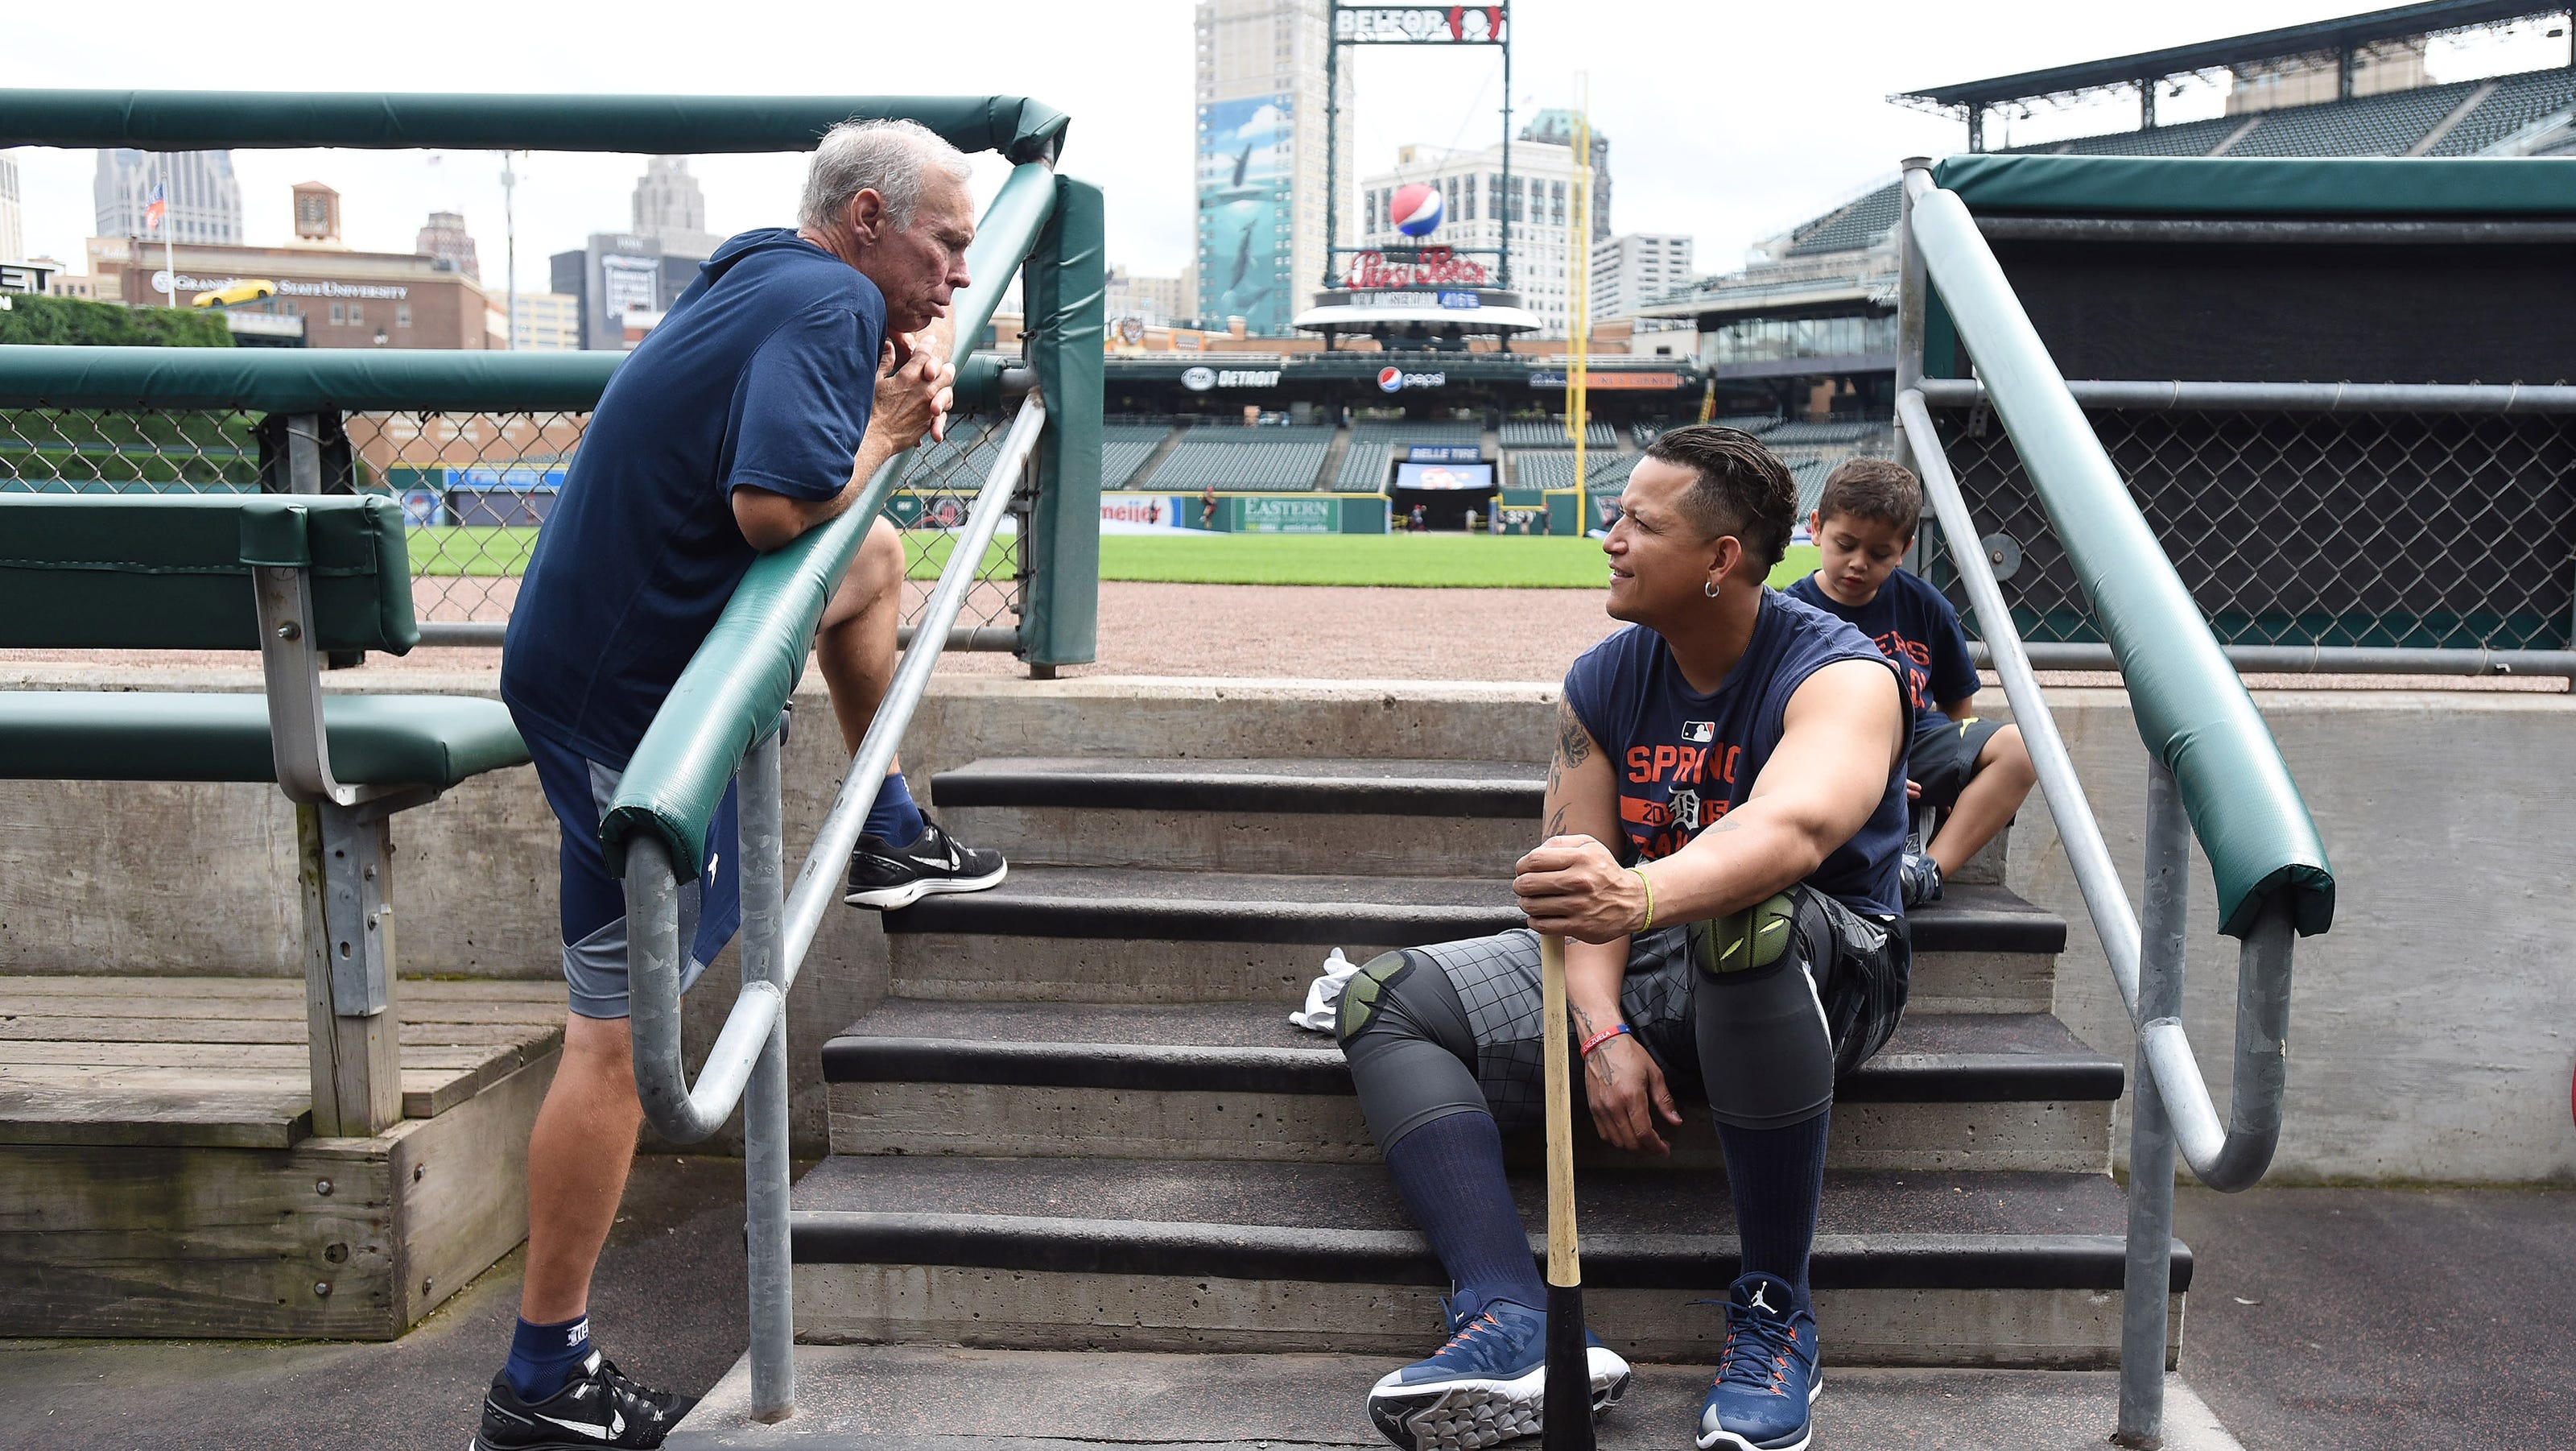 As Cabrera takes his final swings, Tigers legend Alan Trammell shares his  last-hit story